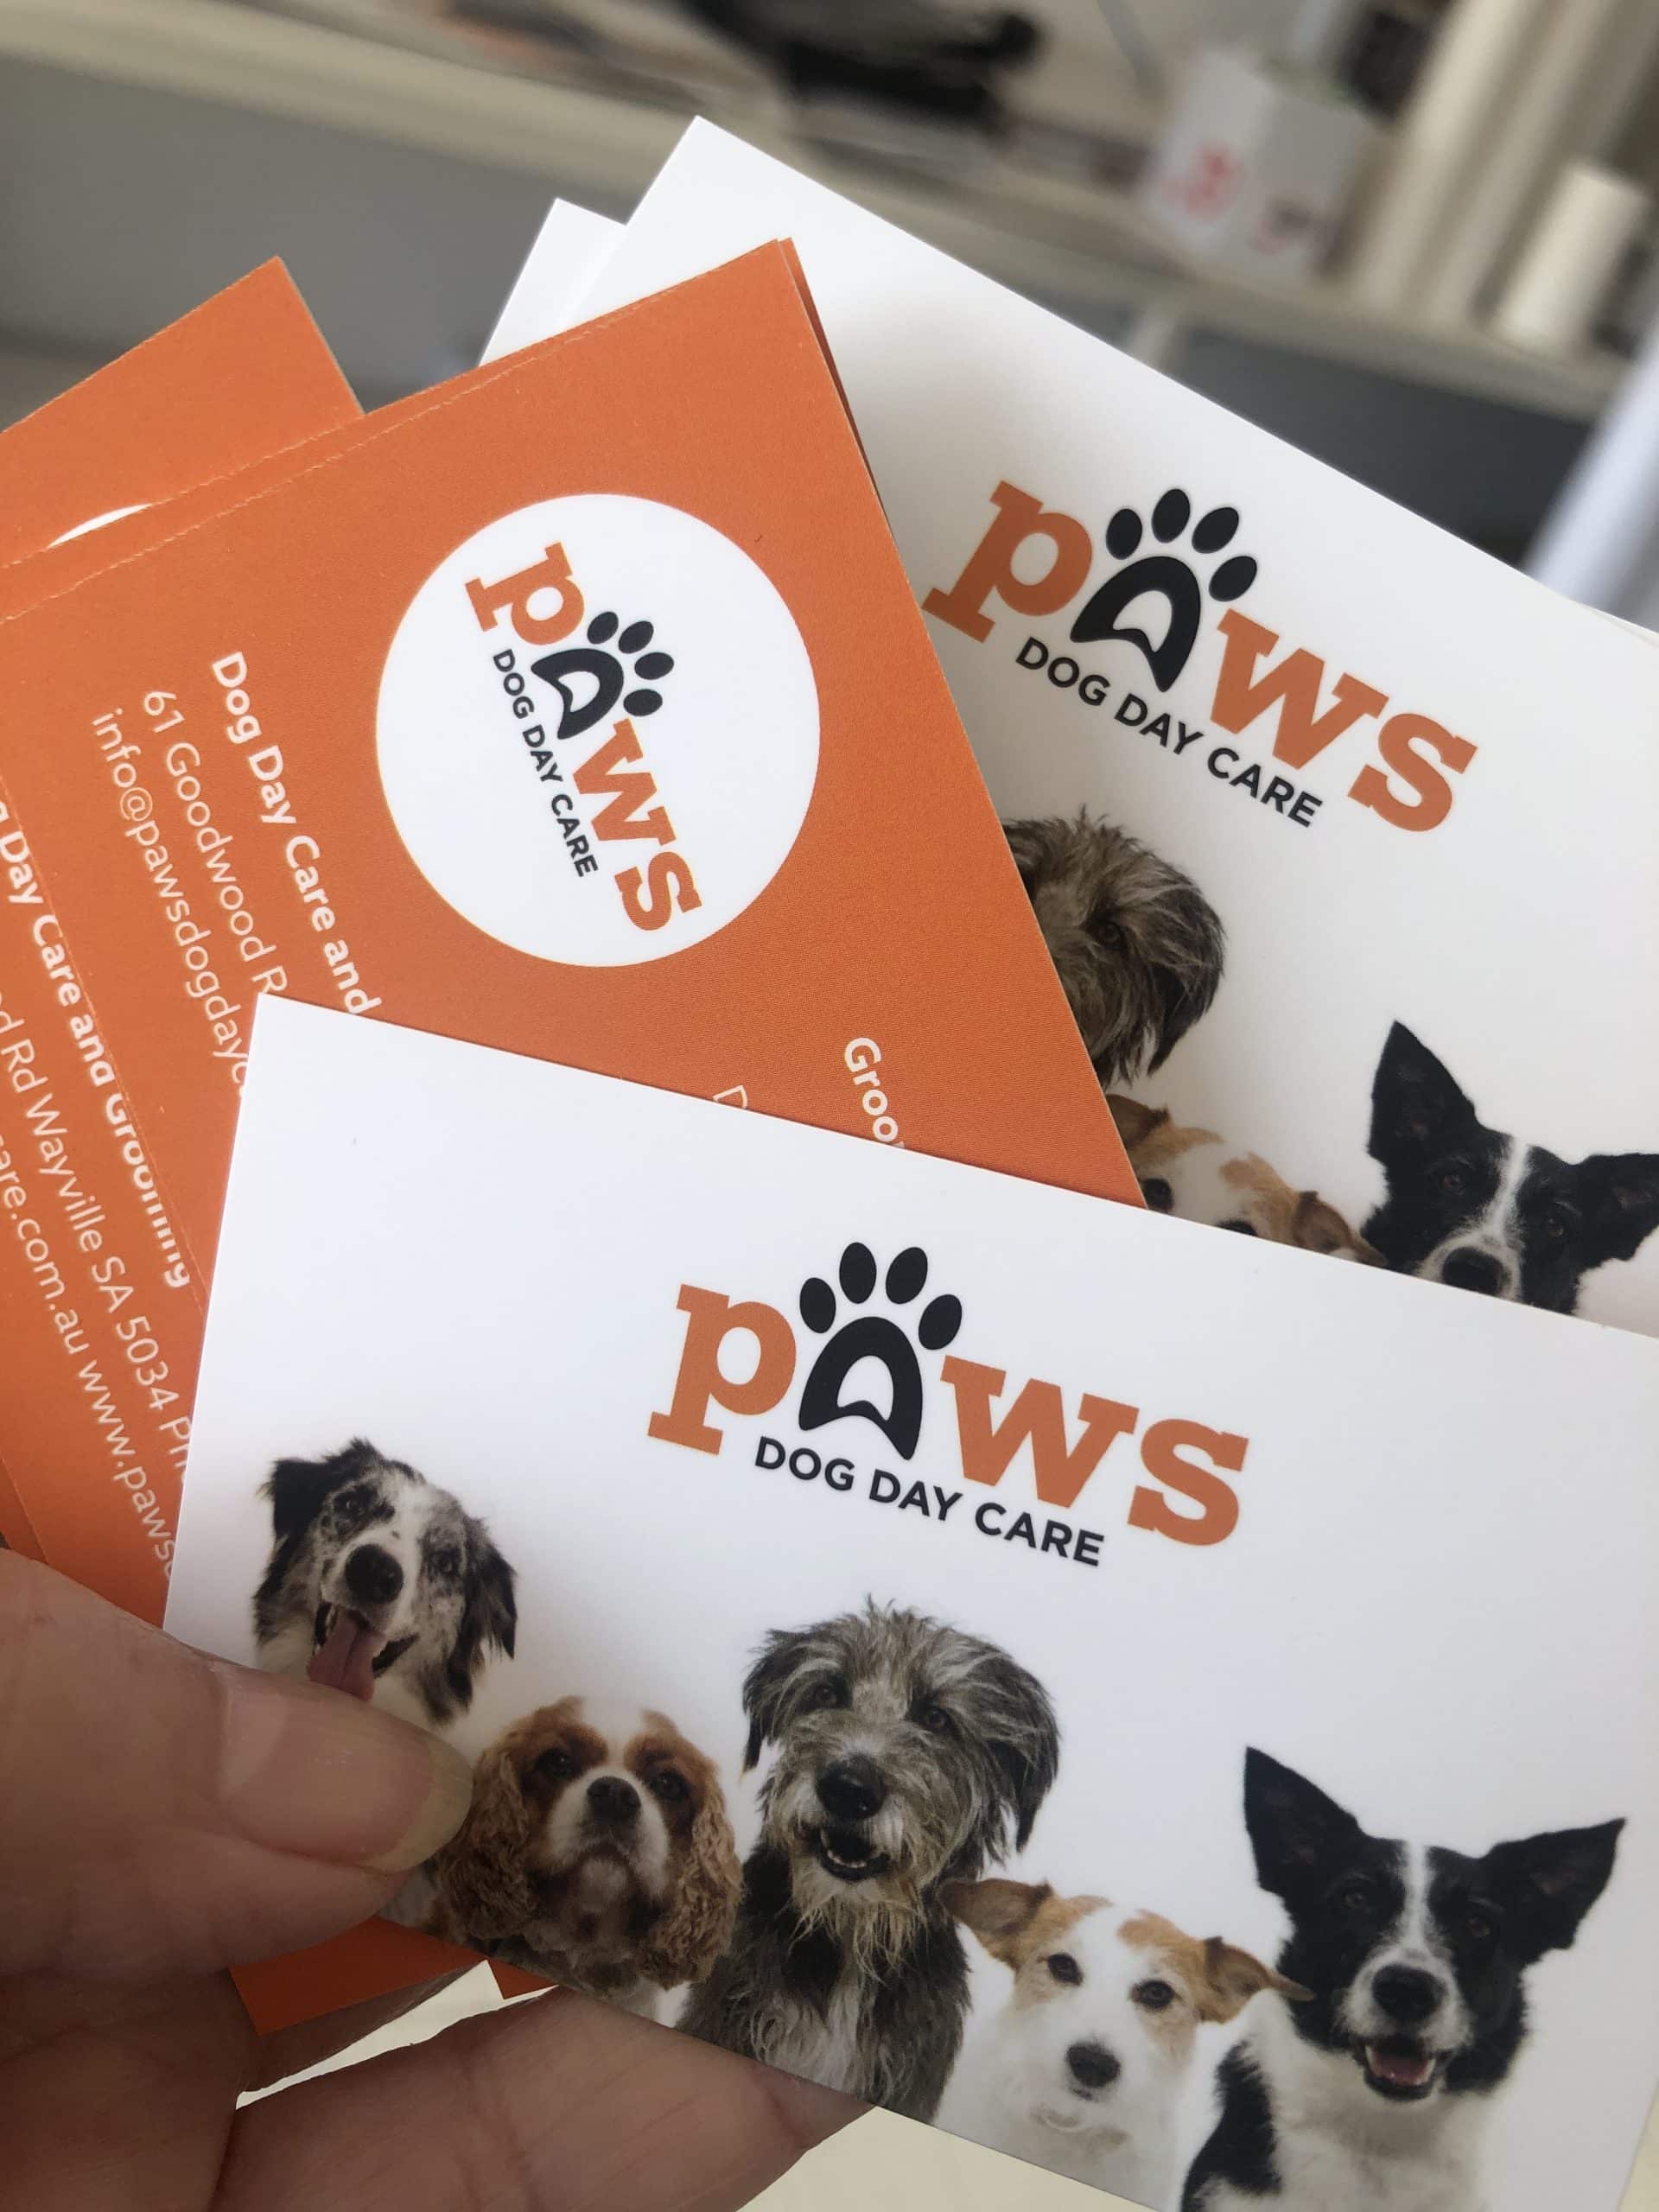 Paws Dog Day Care